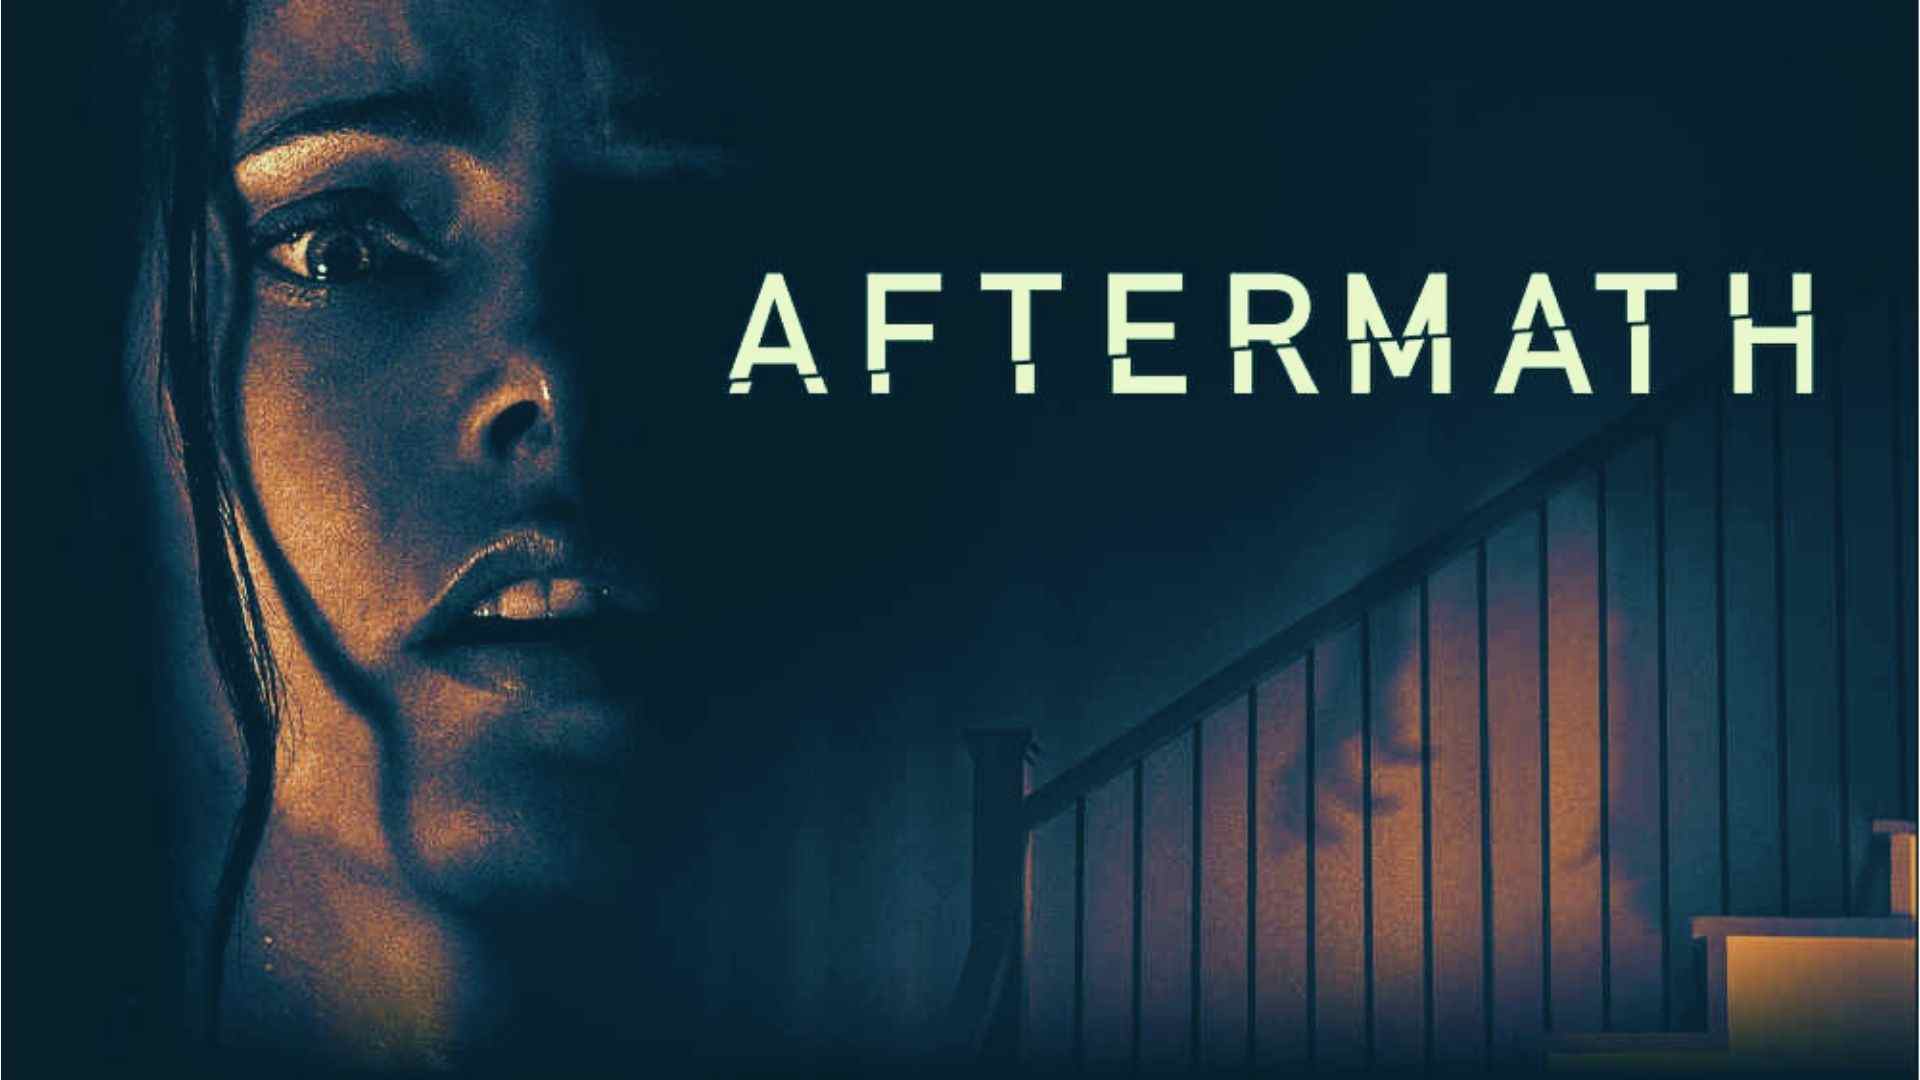 Aftermath Parents Guide 2021 Film Aftermath Age Rating